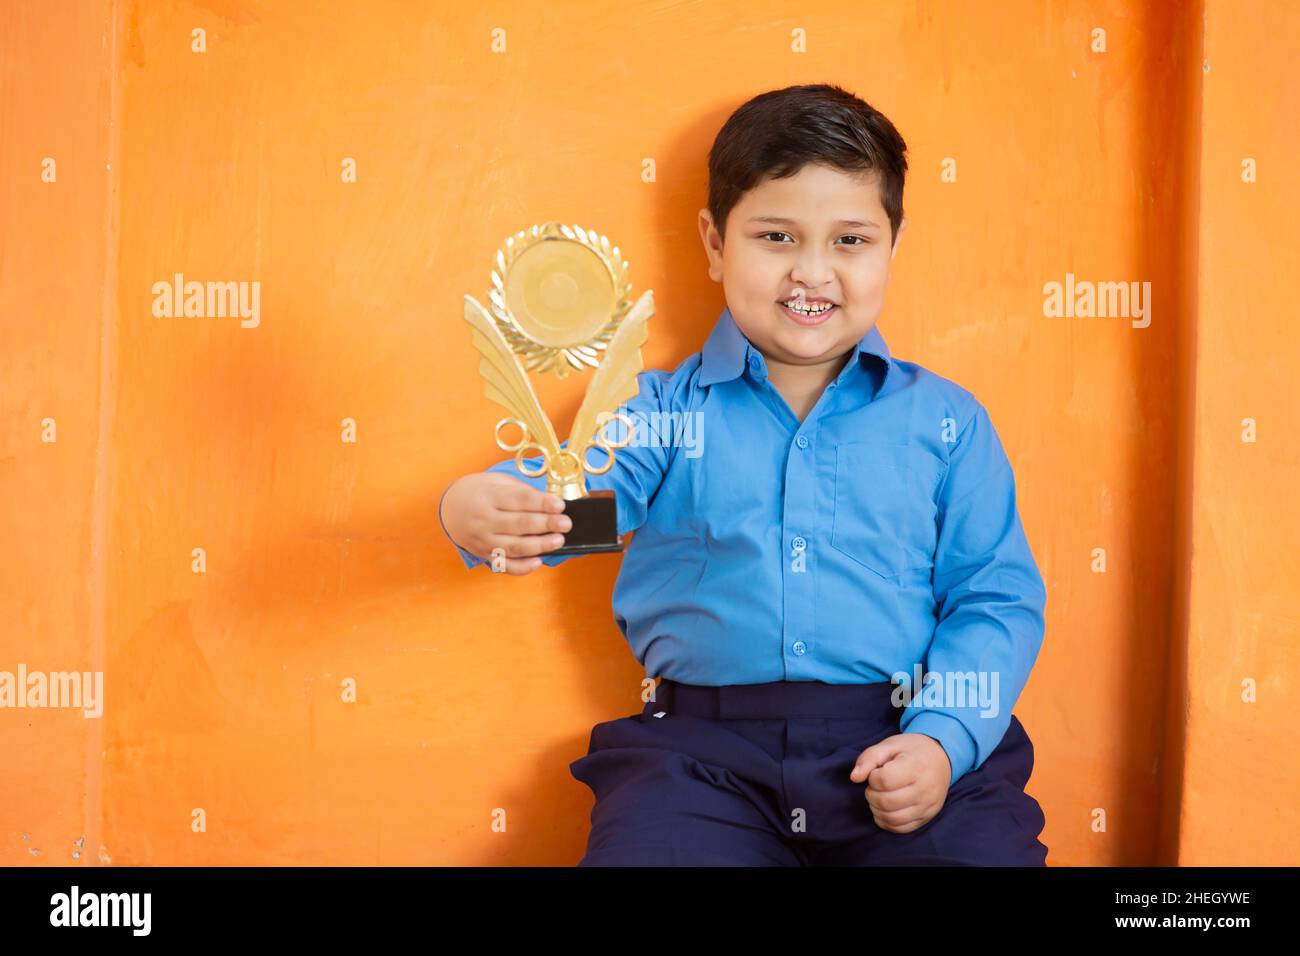 Portrait of happy adorable cute indian boy in school uniform showing trophy or celebrating victory,Cheerful male kid holding winning prize against ora Stock Photo